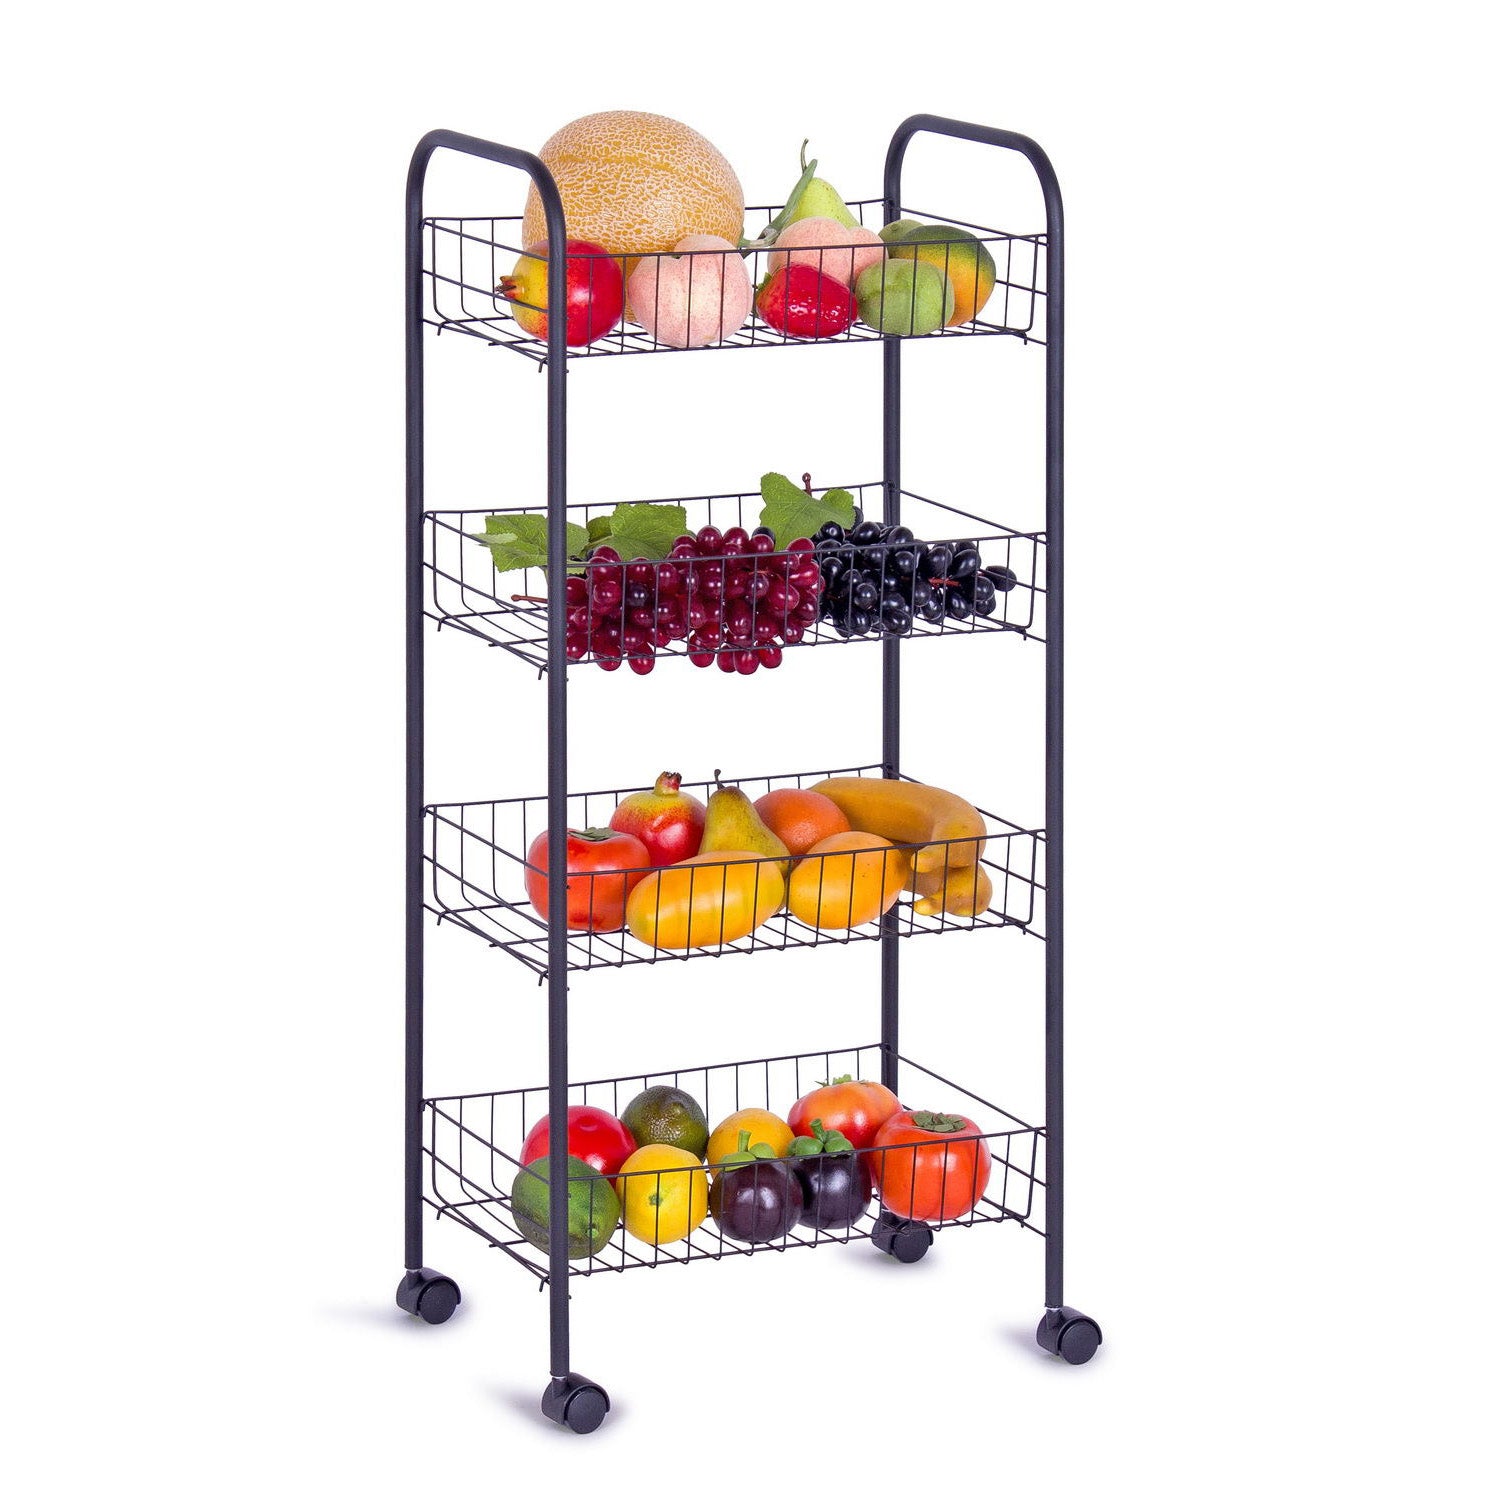 4-Tier Storage Rack with wheels, AN-40-413D